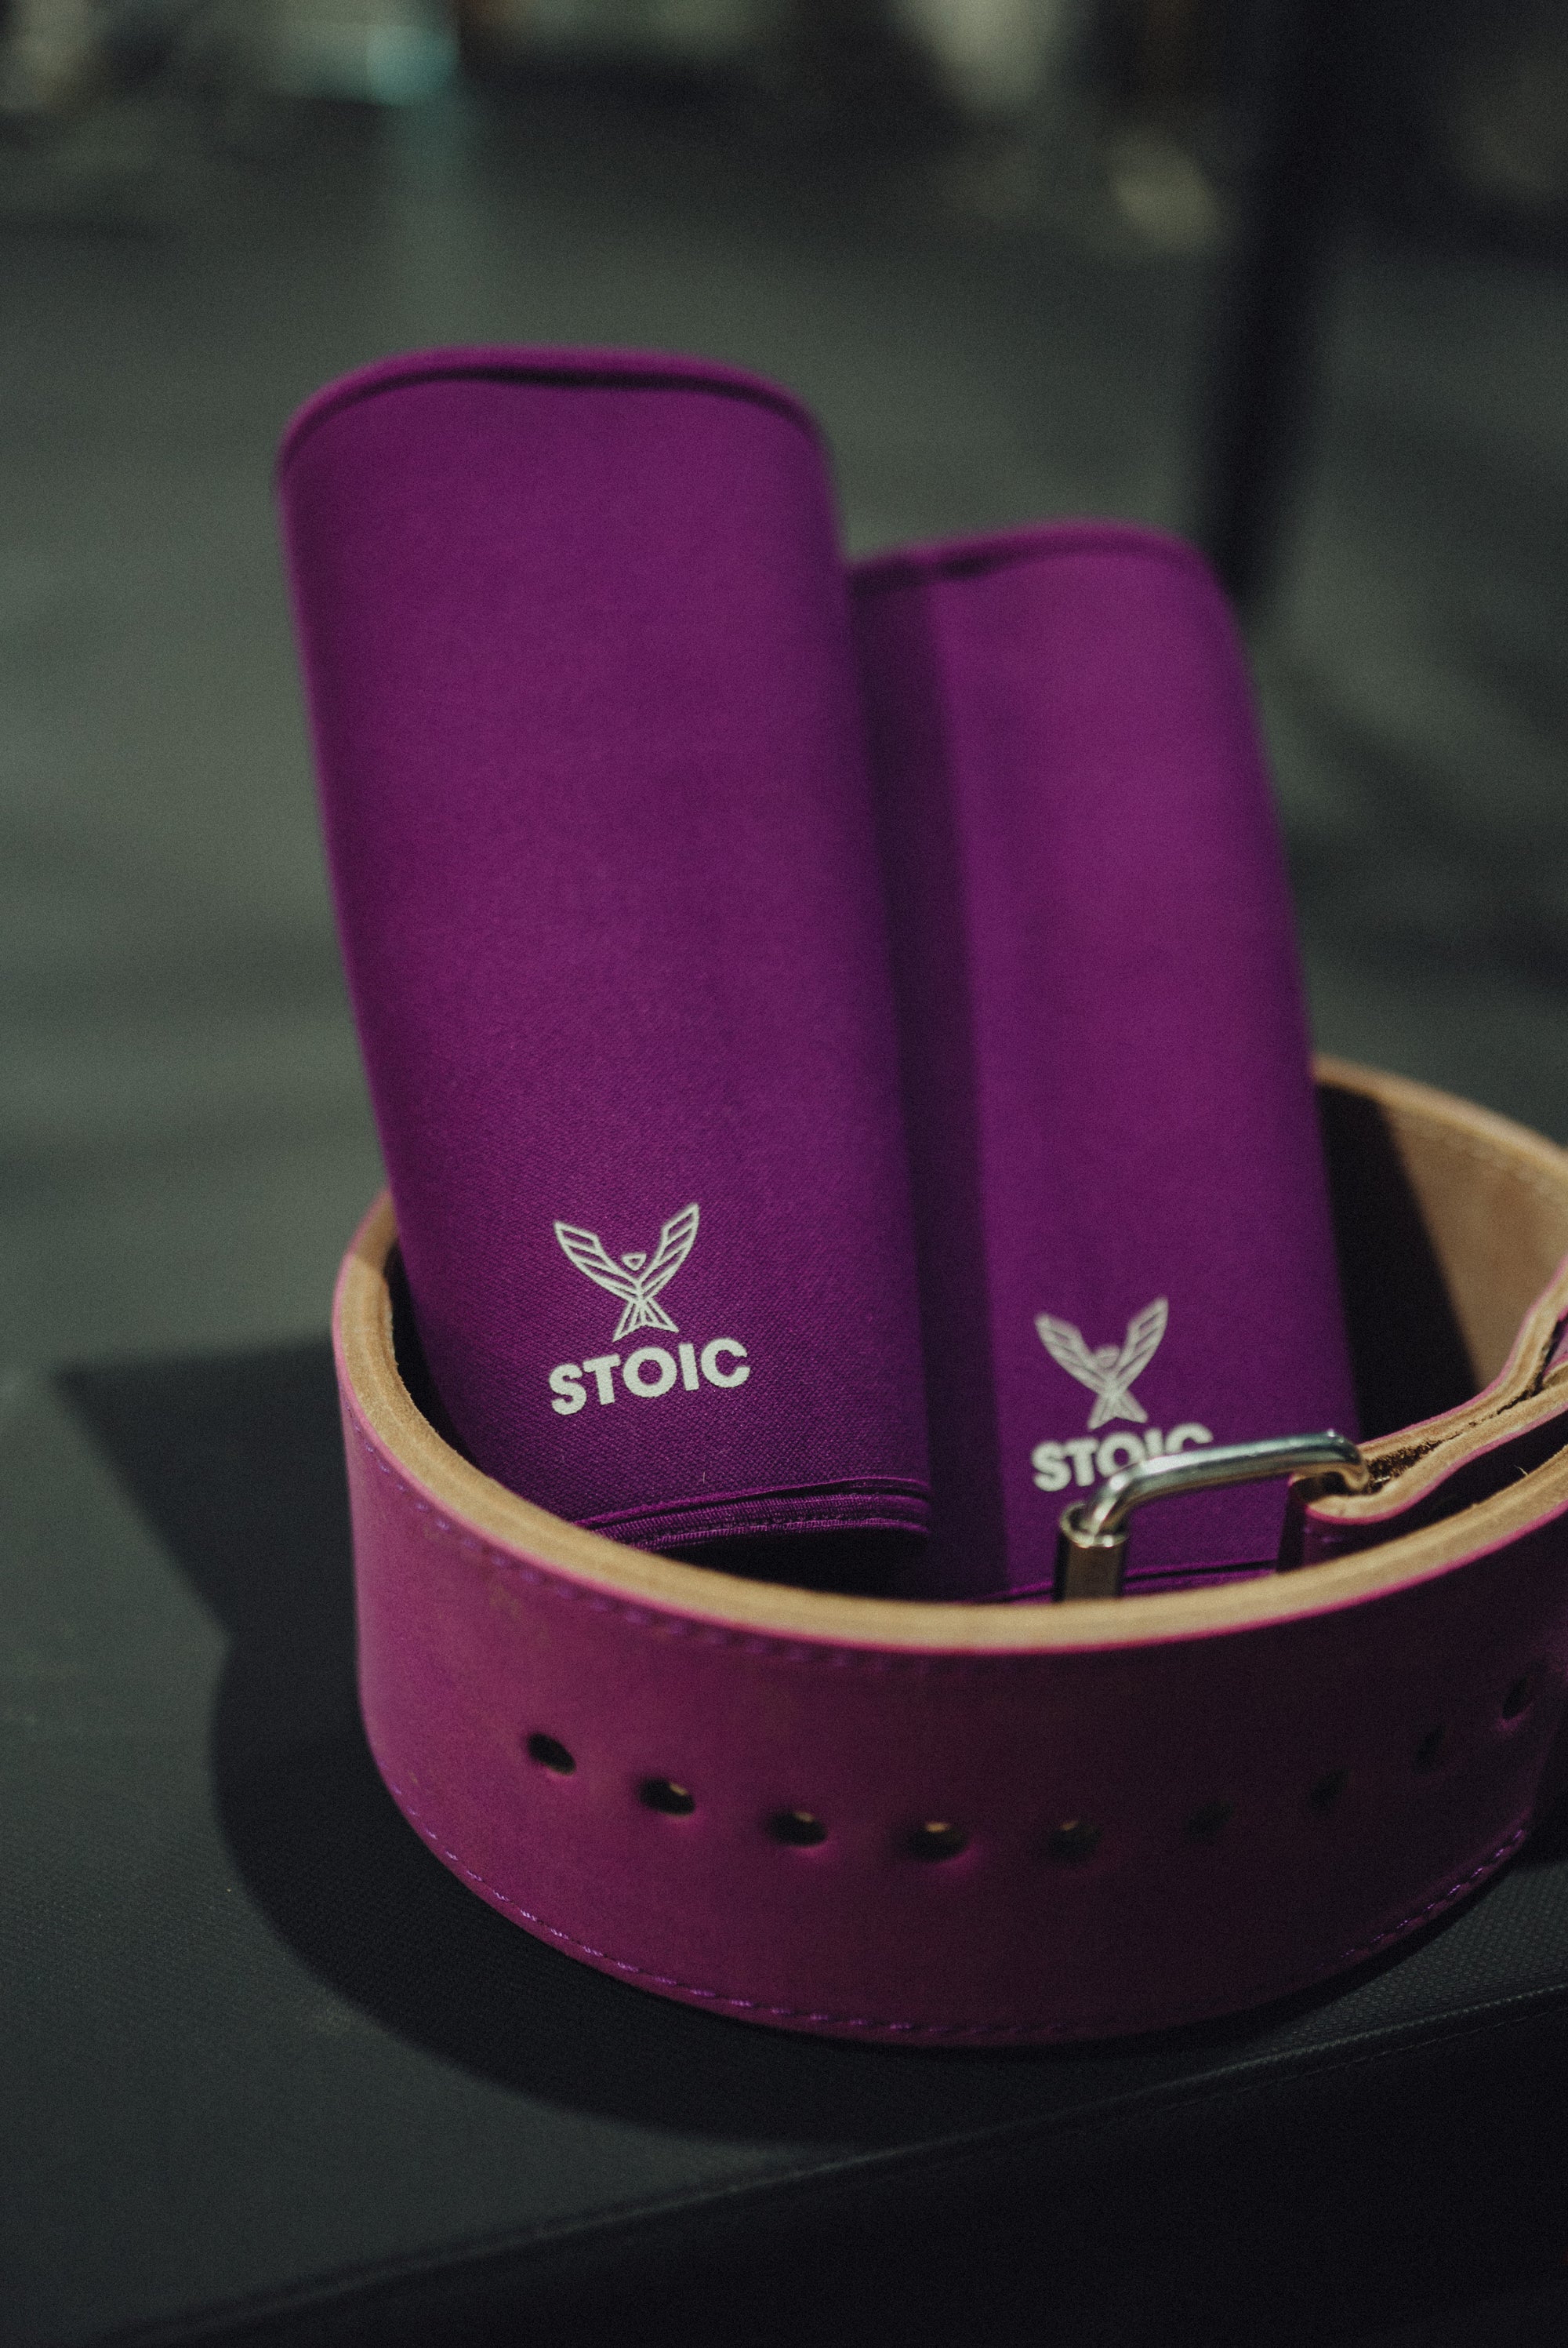 Stoic Purple Knee Sleeves and Prong Belt